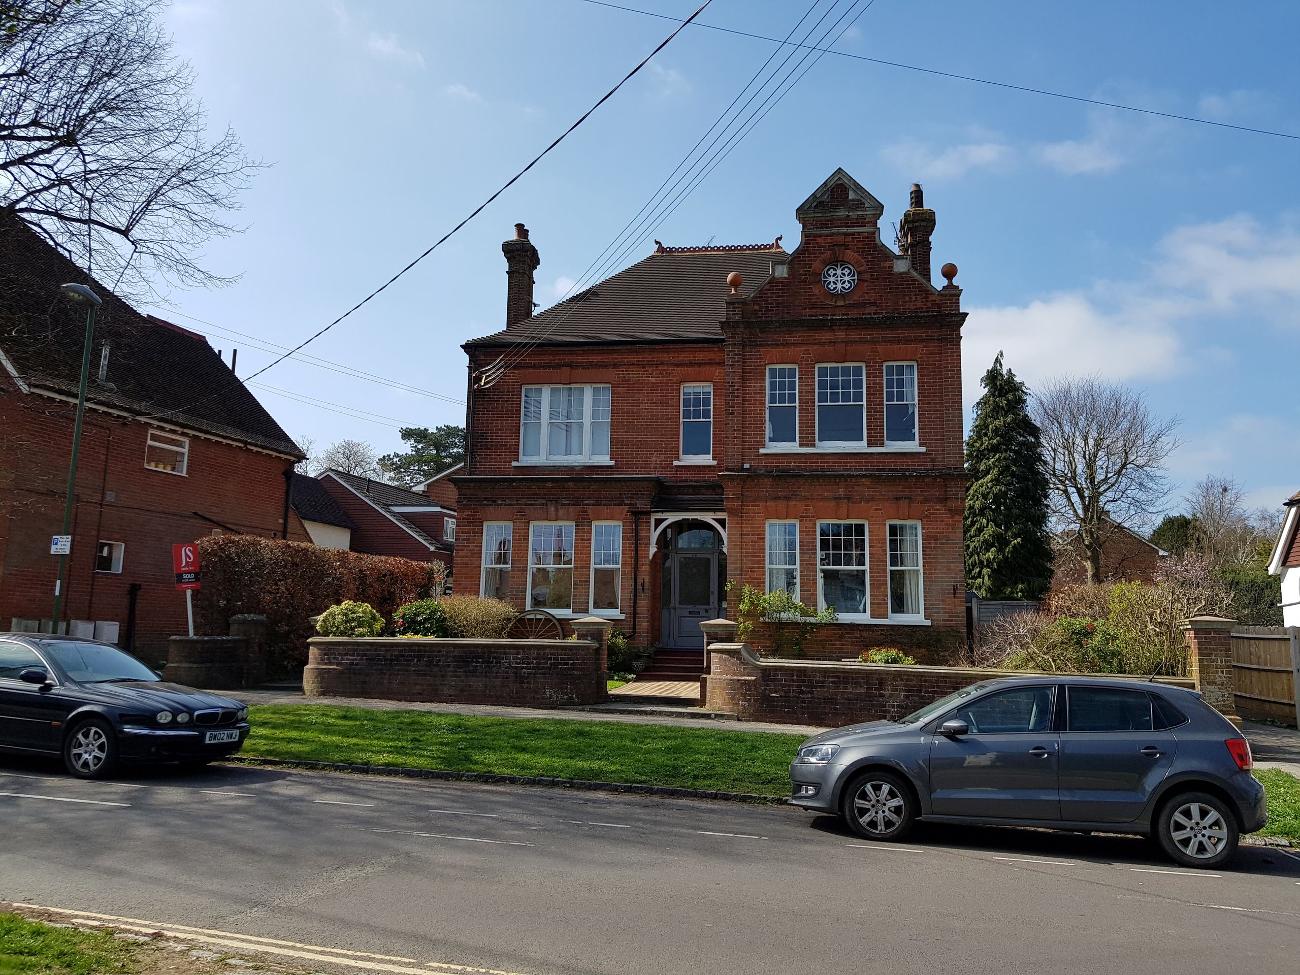 Gallery | Chartered Surveyor in Hurstpeirpoint and West Sussex gallery image 30